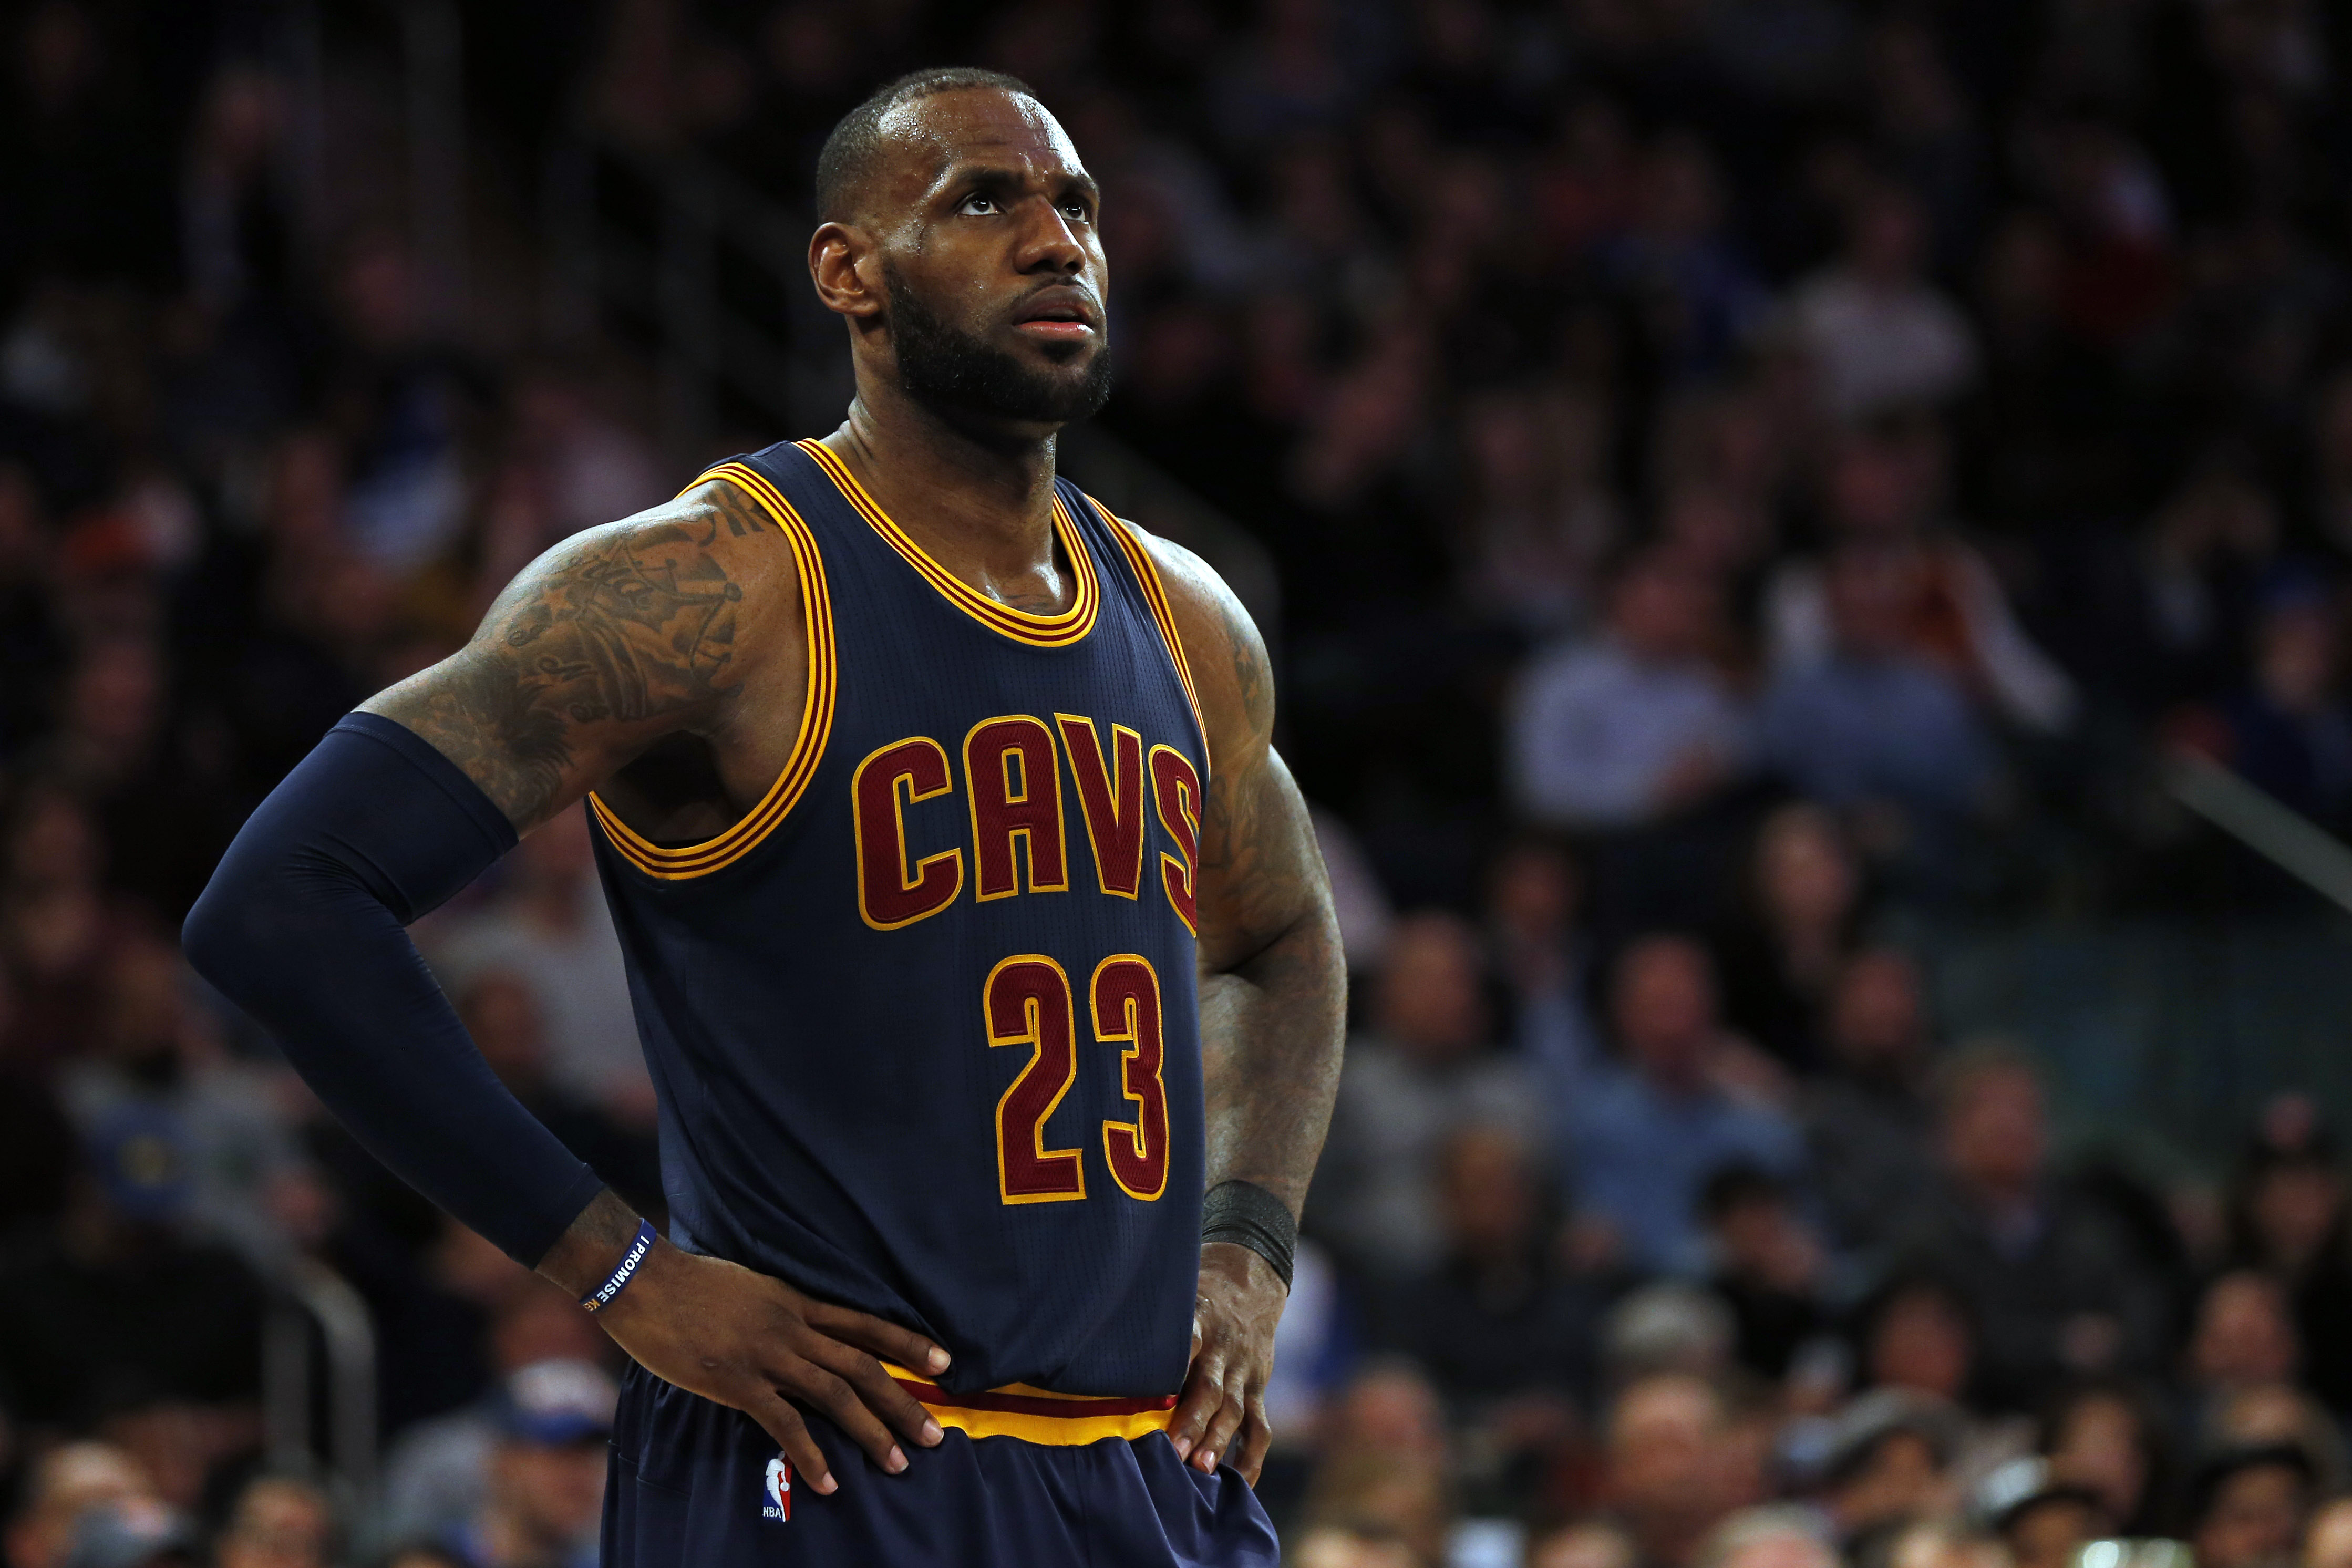 Goals for LeBron James, Cleveland Cavaliers After the All Star Break4476 x 2984